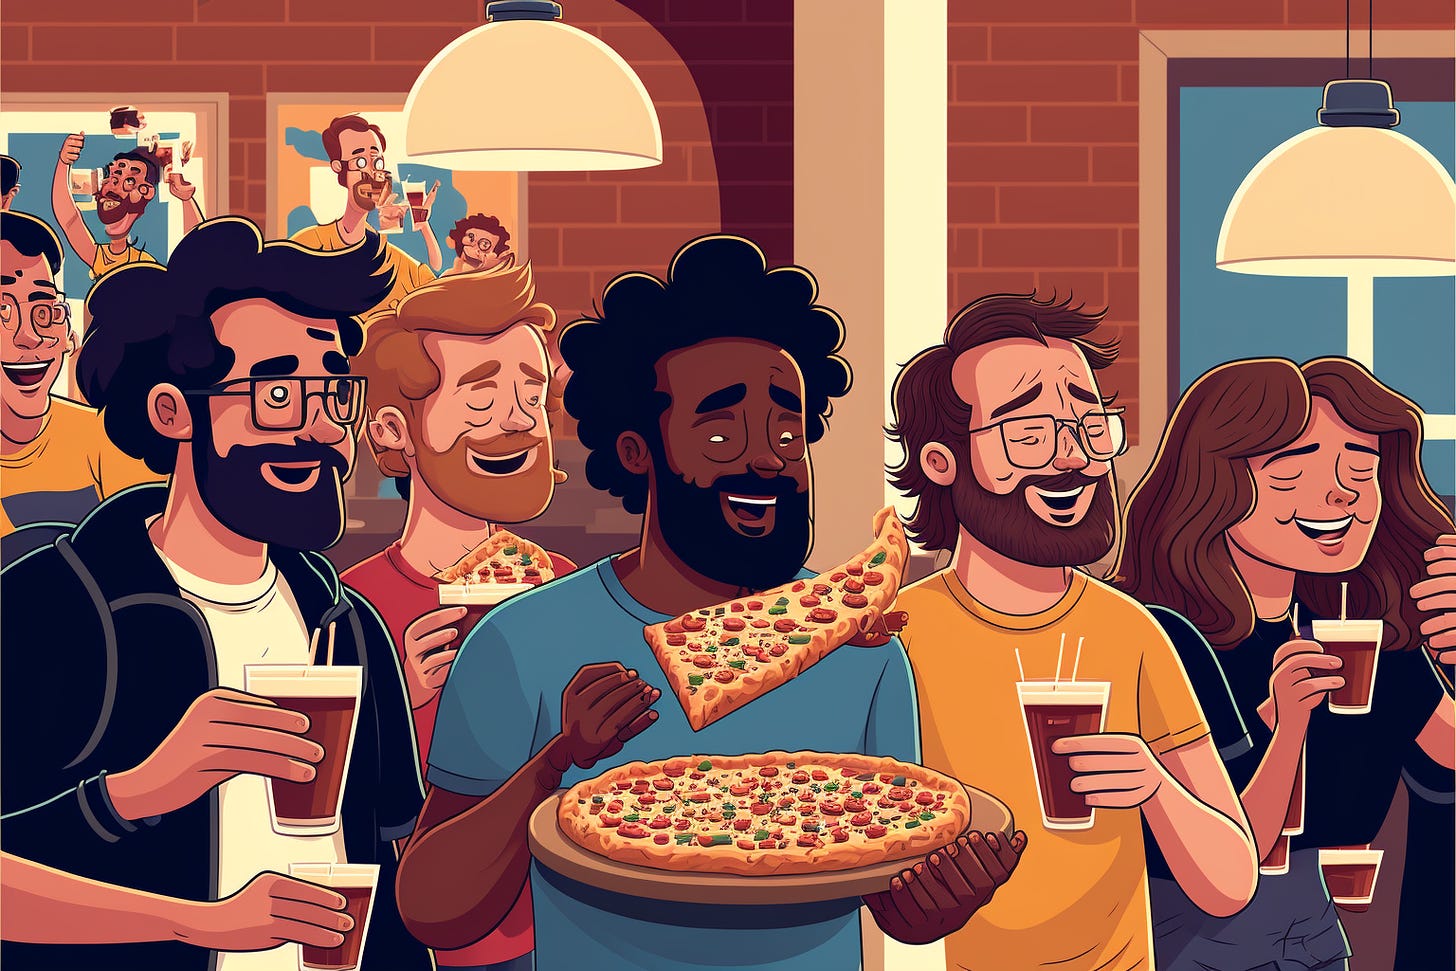 AI startup founders having a pizza happy hour in San Francisco, diverse crowd, minimalist cartoon